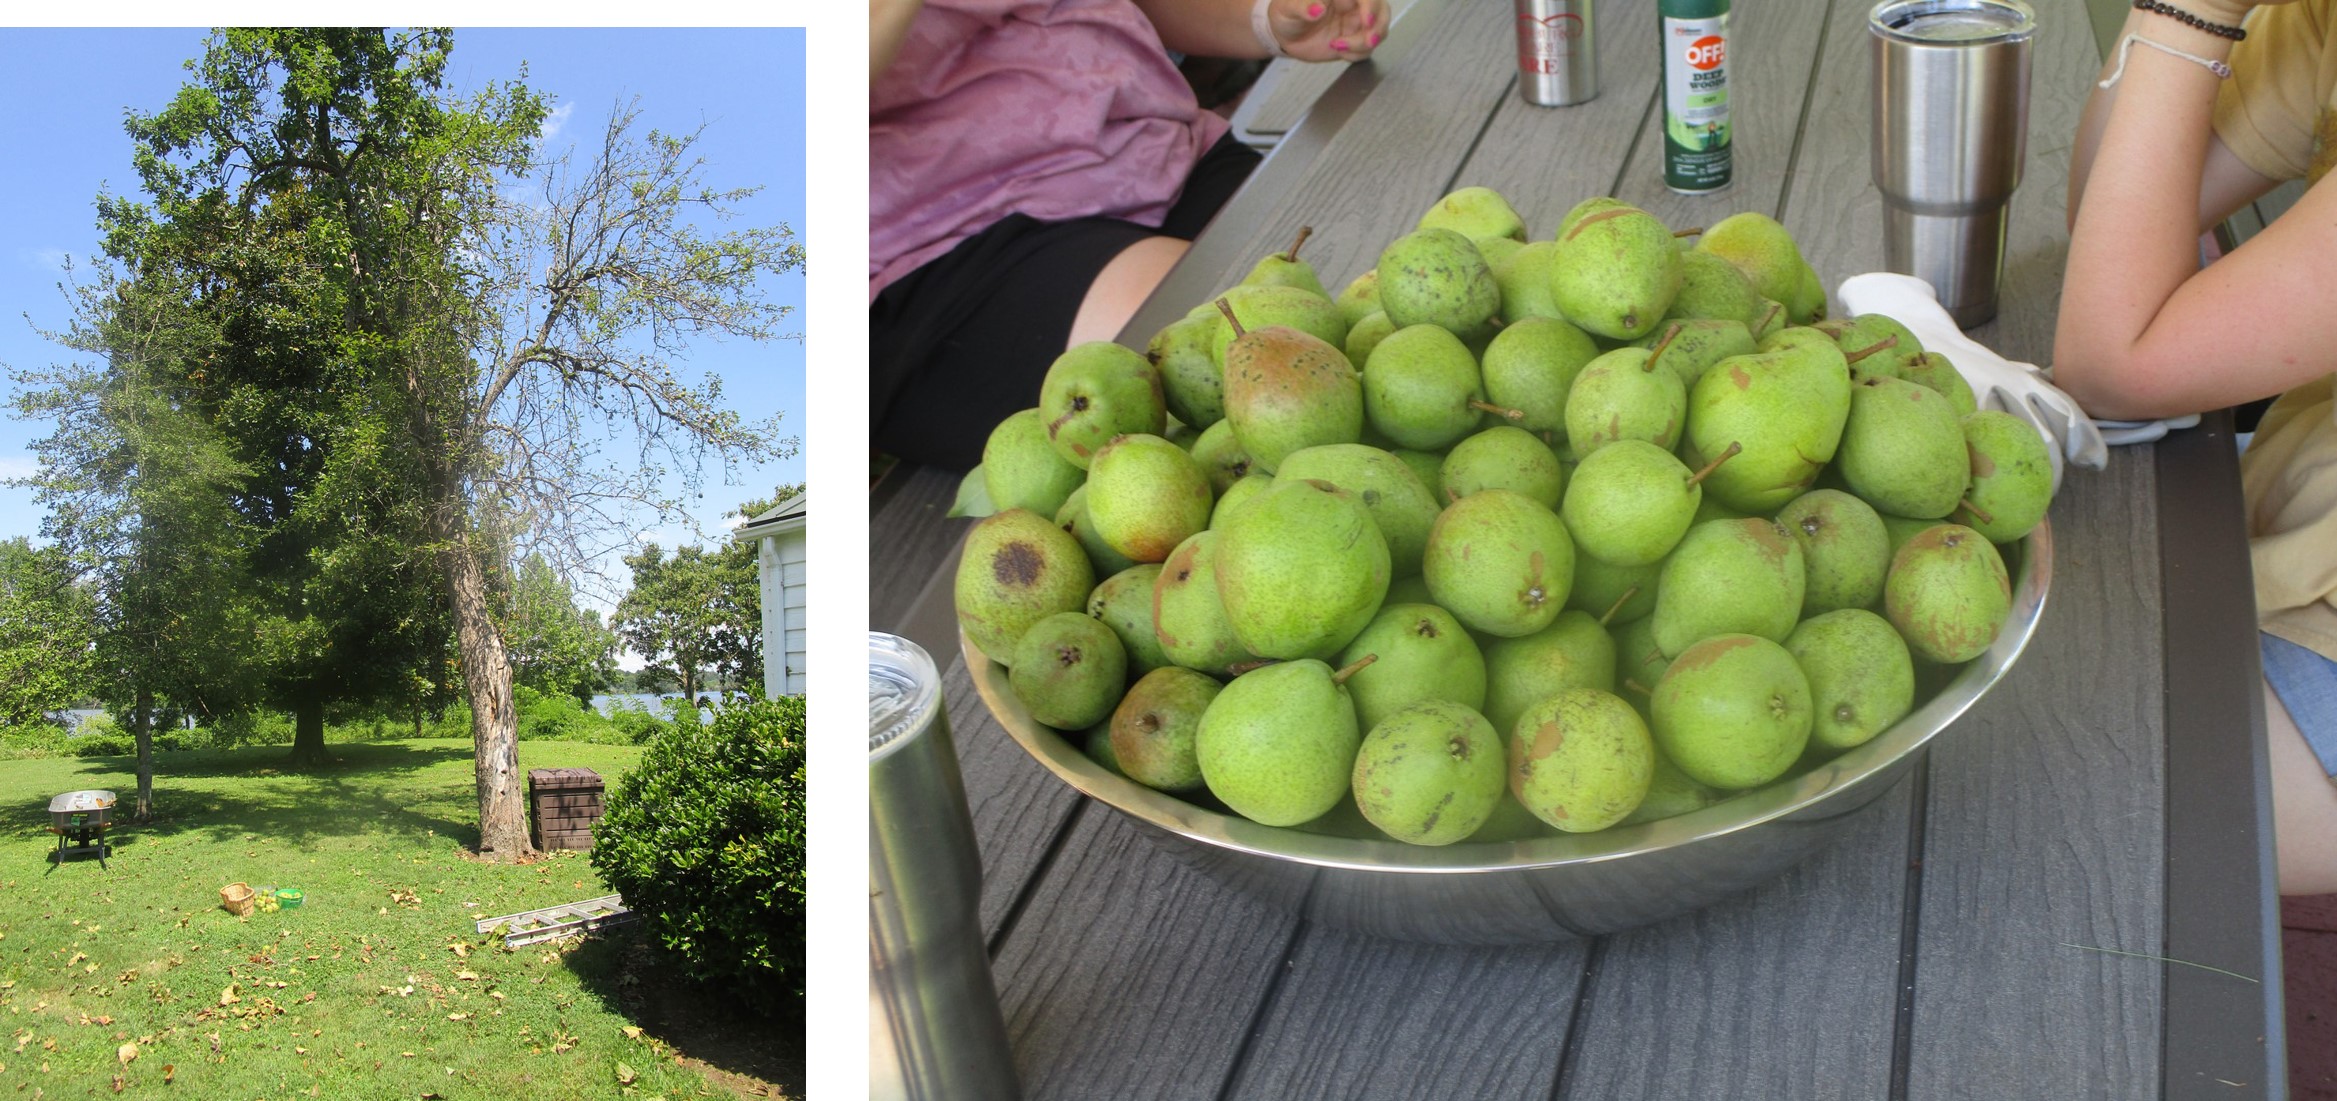 Sept 23 - Pear Tree demise. Ironically, one of the best harvests in July